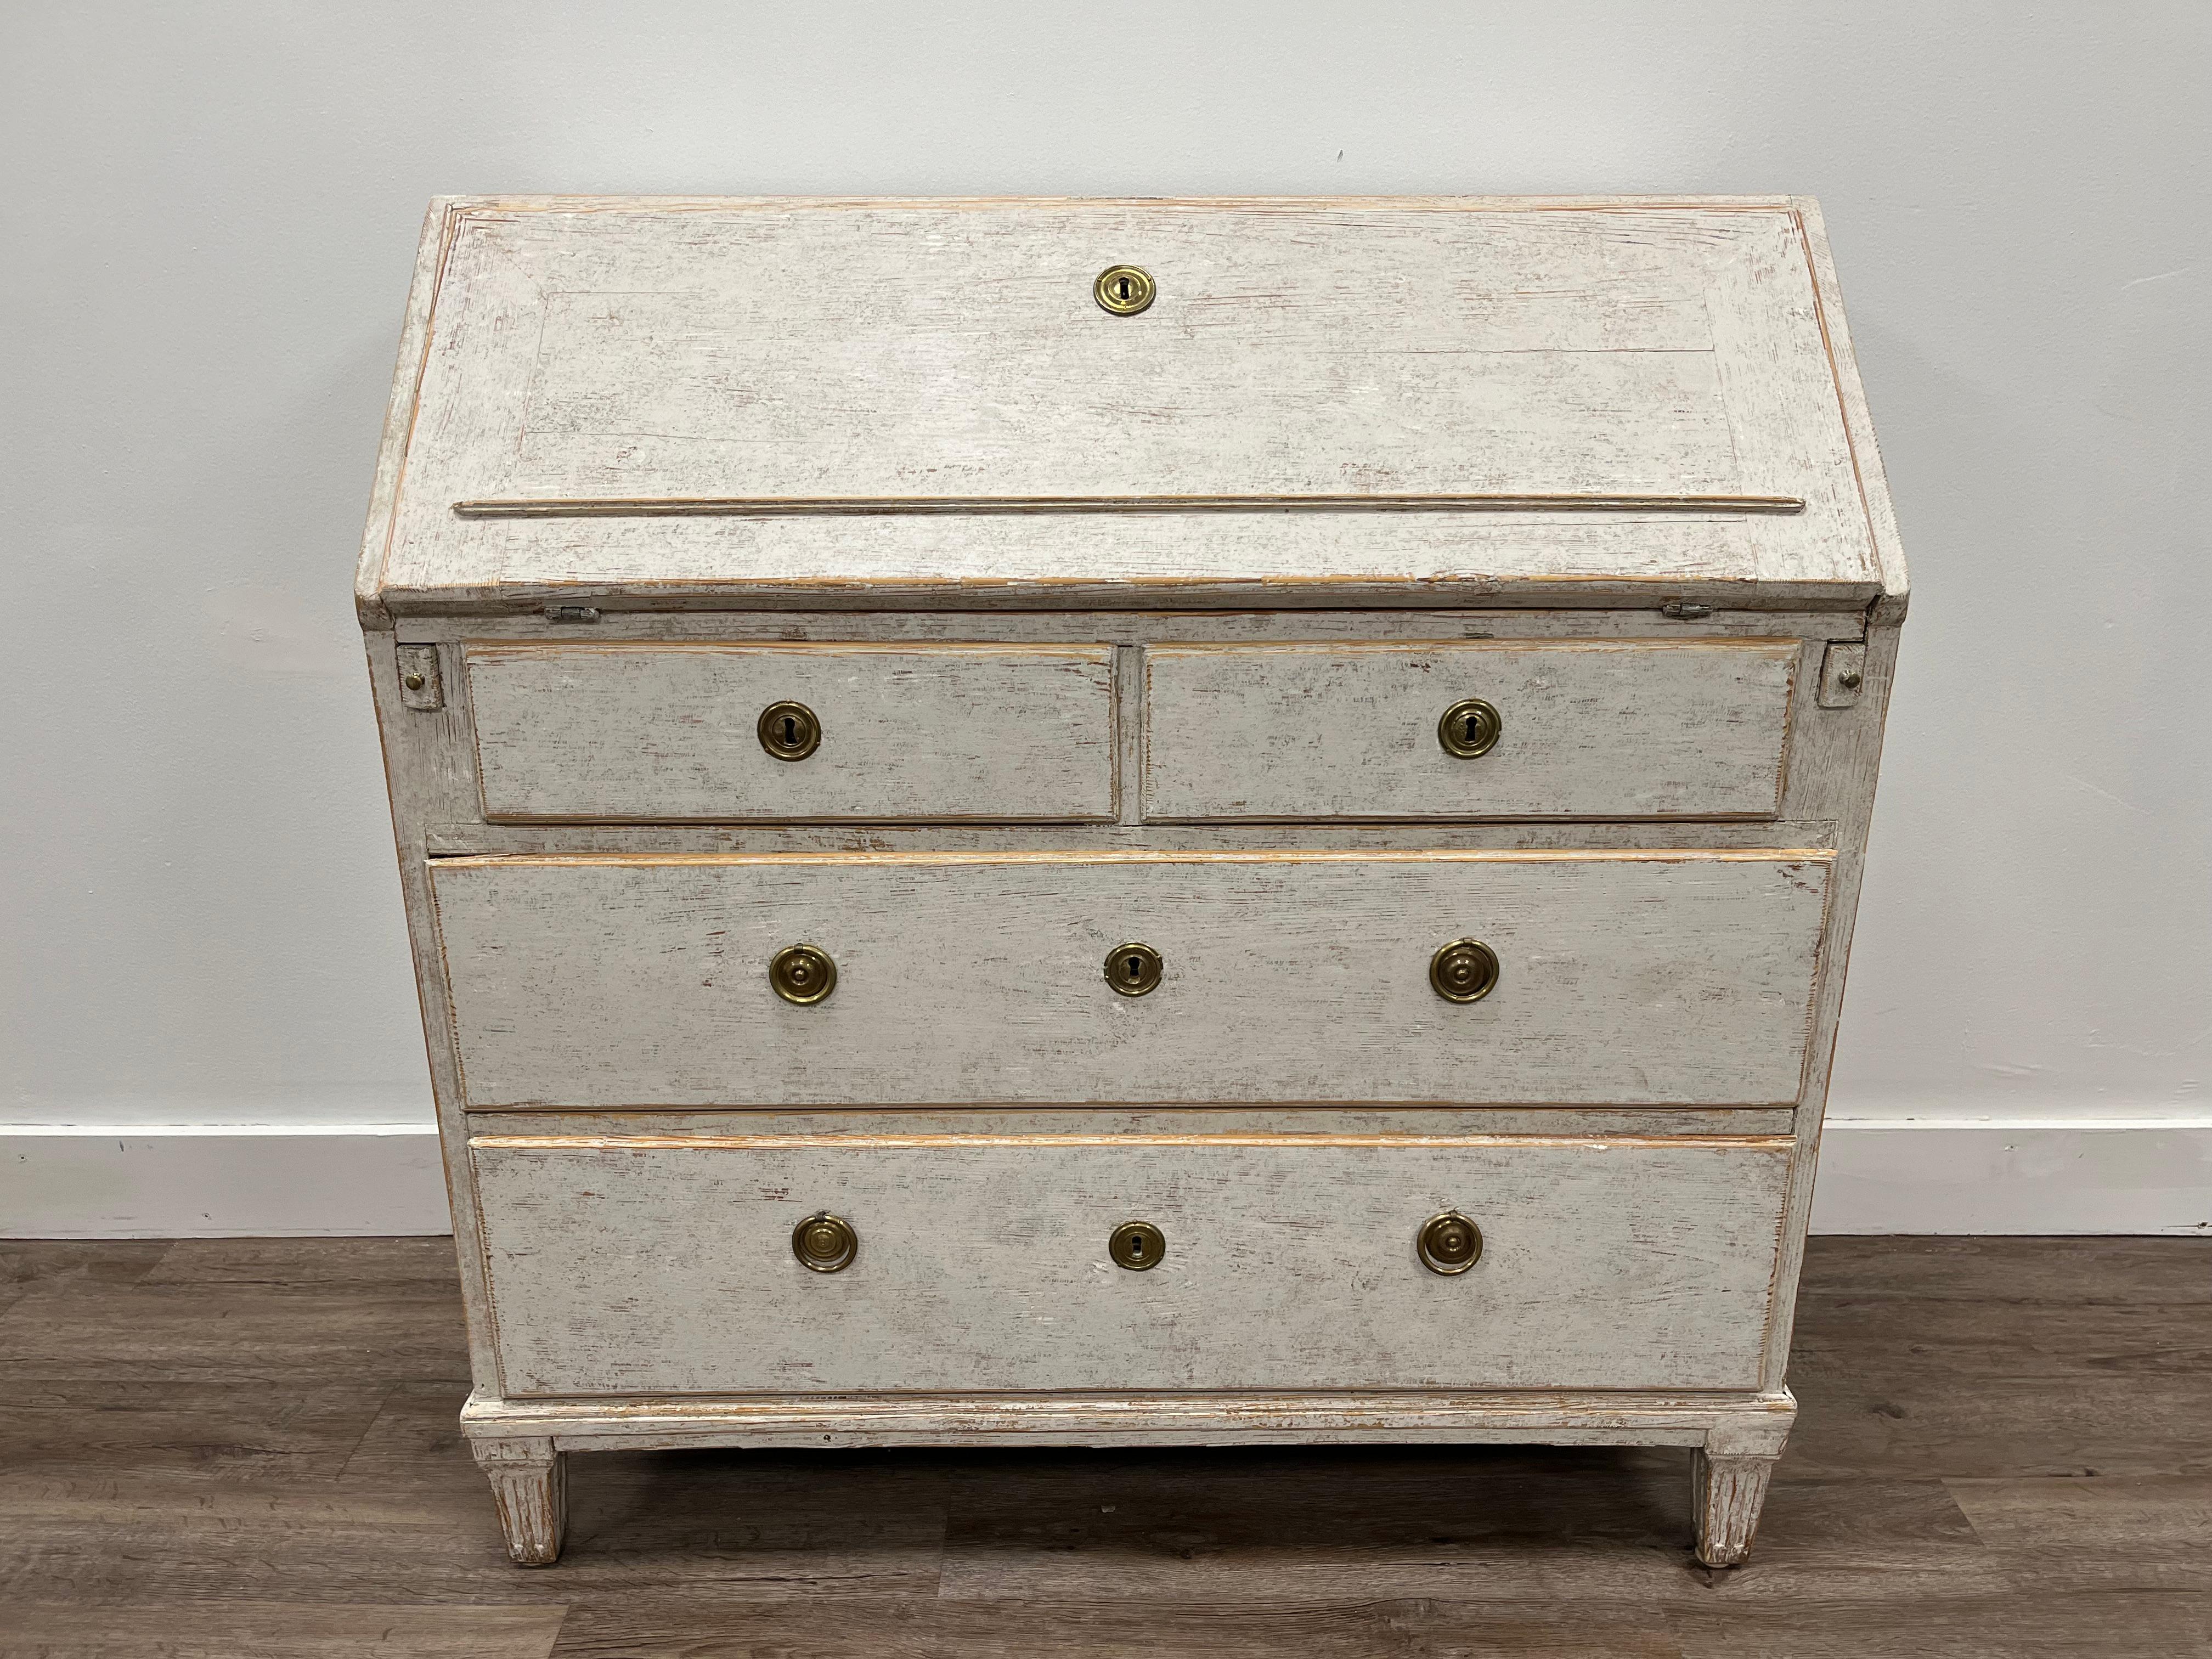 A Gustavian slant front desk. The upper section has eight small drawers, four cubbies, two sliding columns and a small locking door. The lower section has two small drawers over two large drawers. Sits atop fluted rectangular feet. Original brass